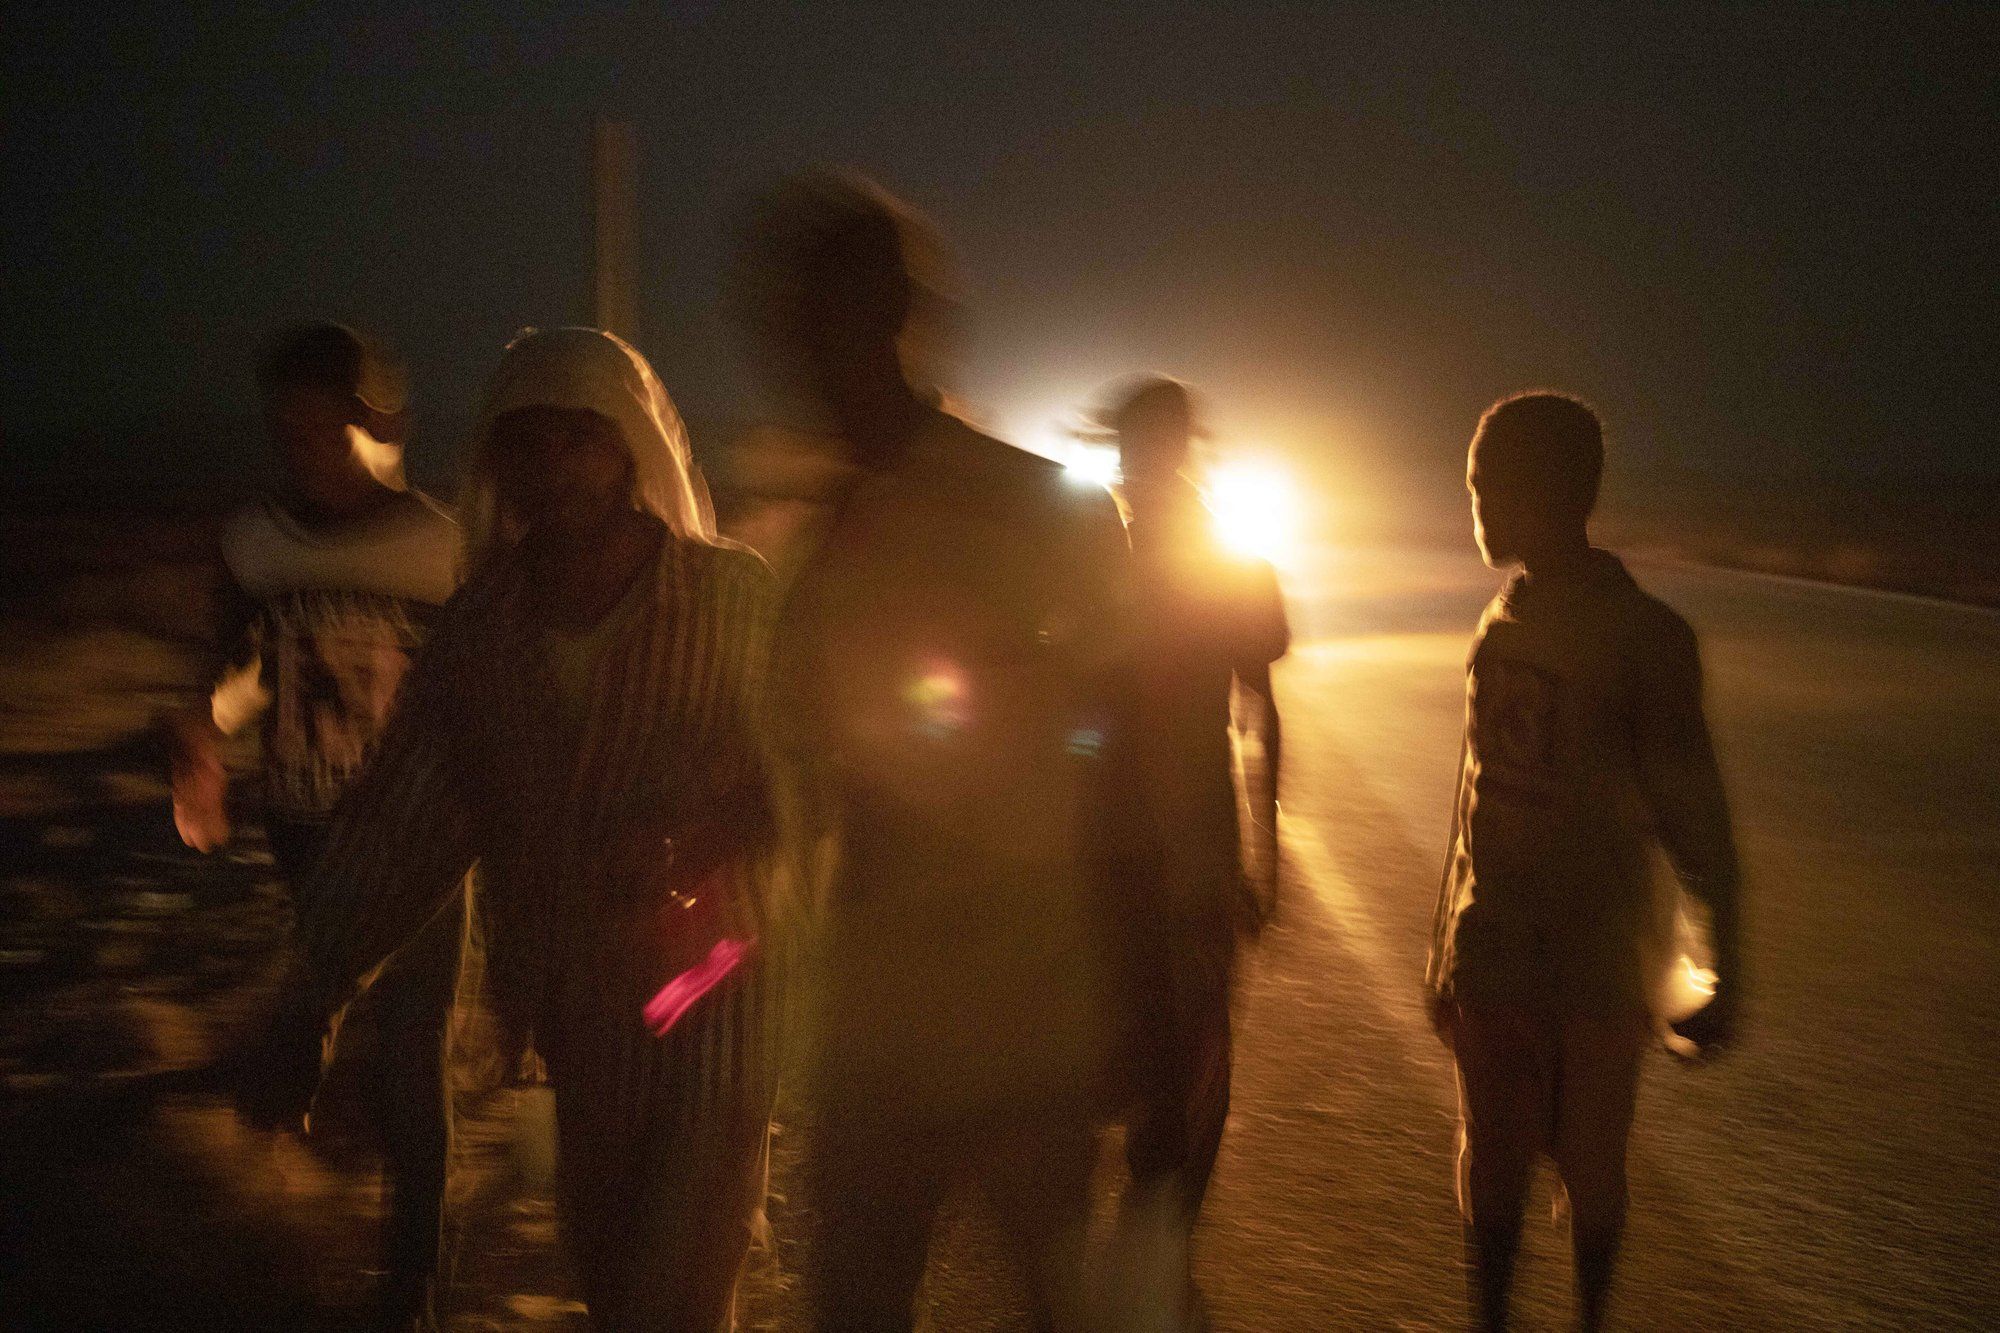 Ethiopian migrant Mohammed Eissa, second left, walks on a highway with boys he met on the way, about 50 kilometers (31 miles) from Djibouti, July 12, 2019. This was his third attempt to reach Saudi Arabia to find work; the previous trips ended in deportation. Eissa had left behind his wife, nine sons, and a daughter. His wife cares for his elderly father. His children work the farm growing vegetables, but harvests are unpredictable: "If there's no rain, there's nothing." Image by AP Photo/Nariman El-Mofty. Ethiopia, 2019.